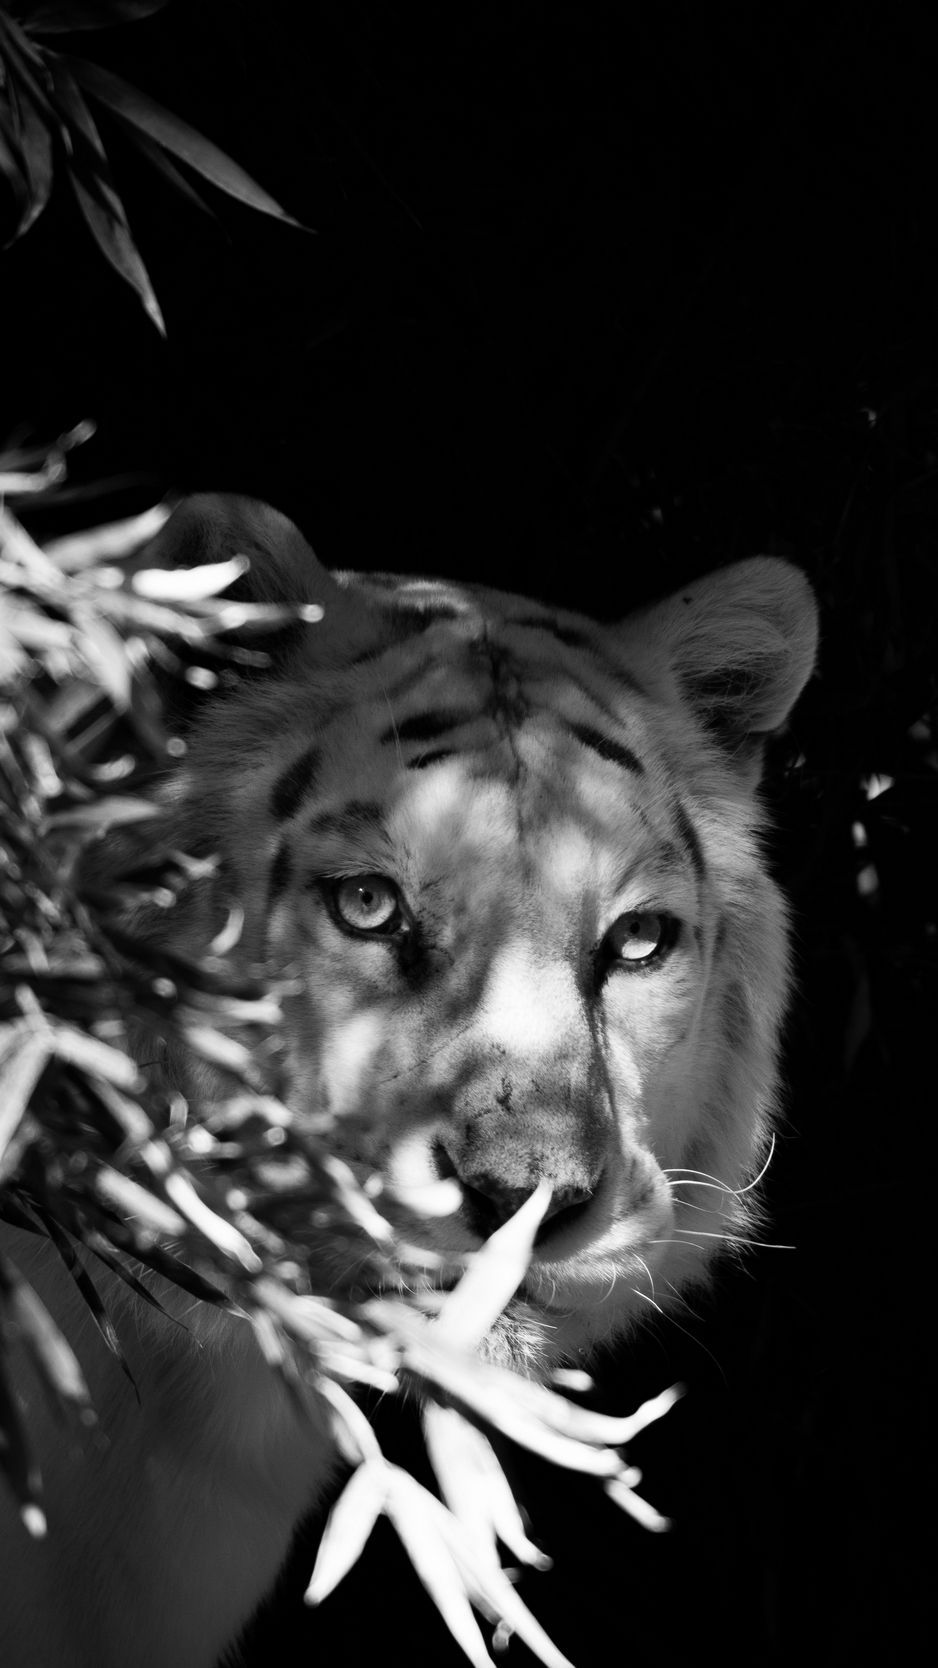 Download wallpaper 938x1668 tiger, white tiger, bw, hide, branches